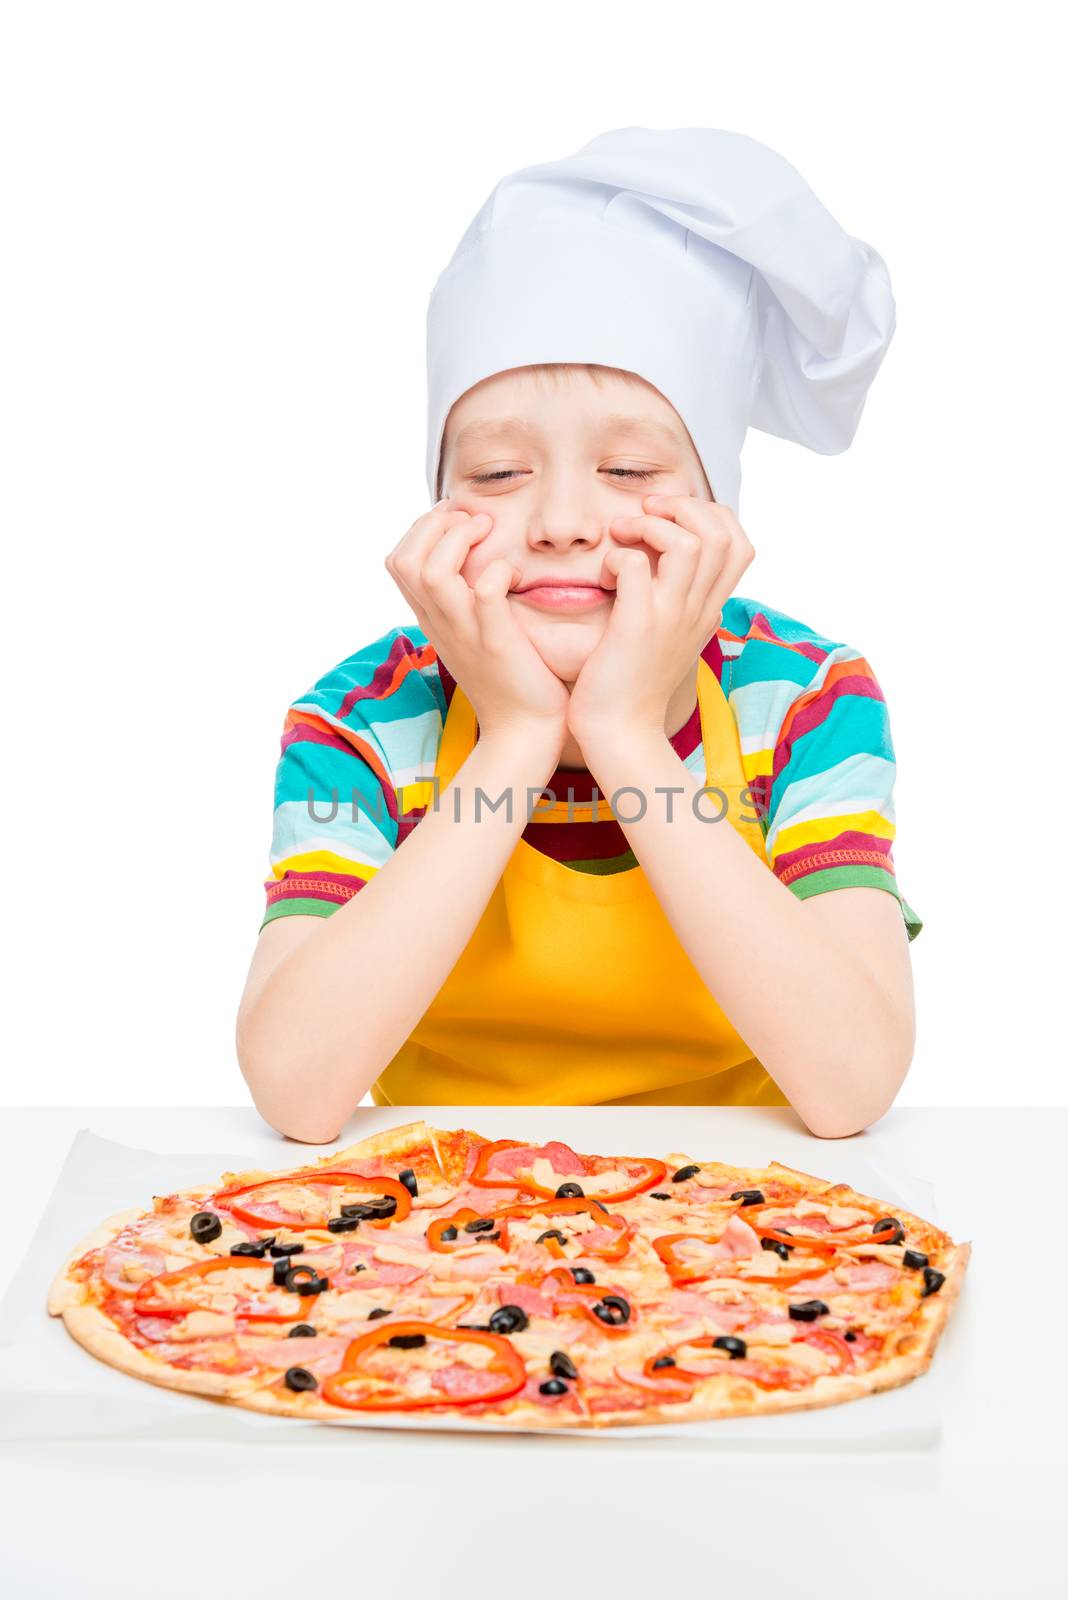 cook with homemade pizza, boy 10 years old, portrait on white background isolated